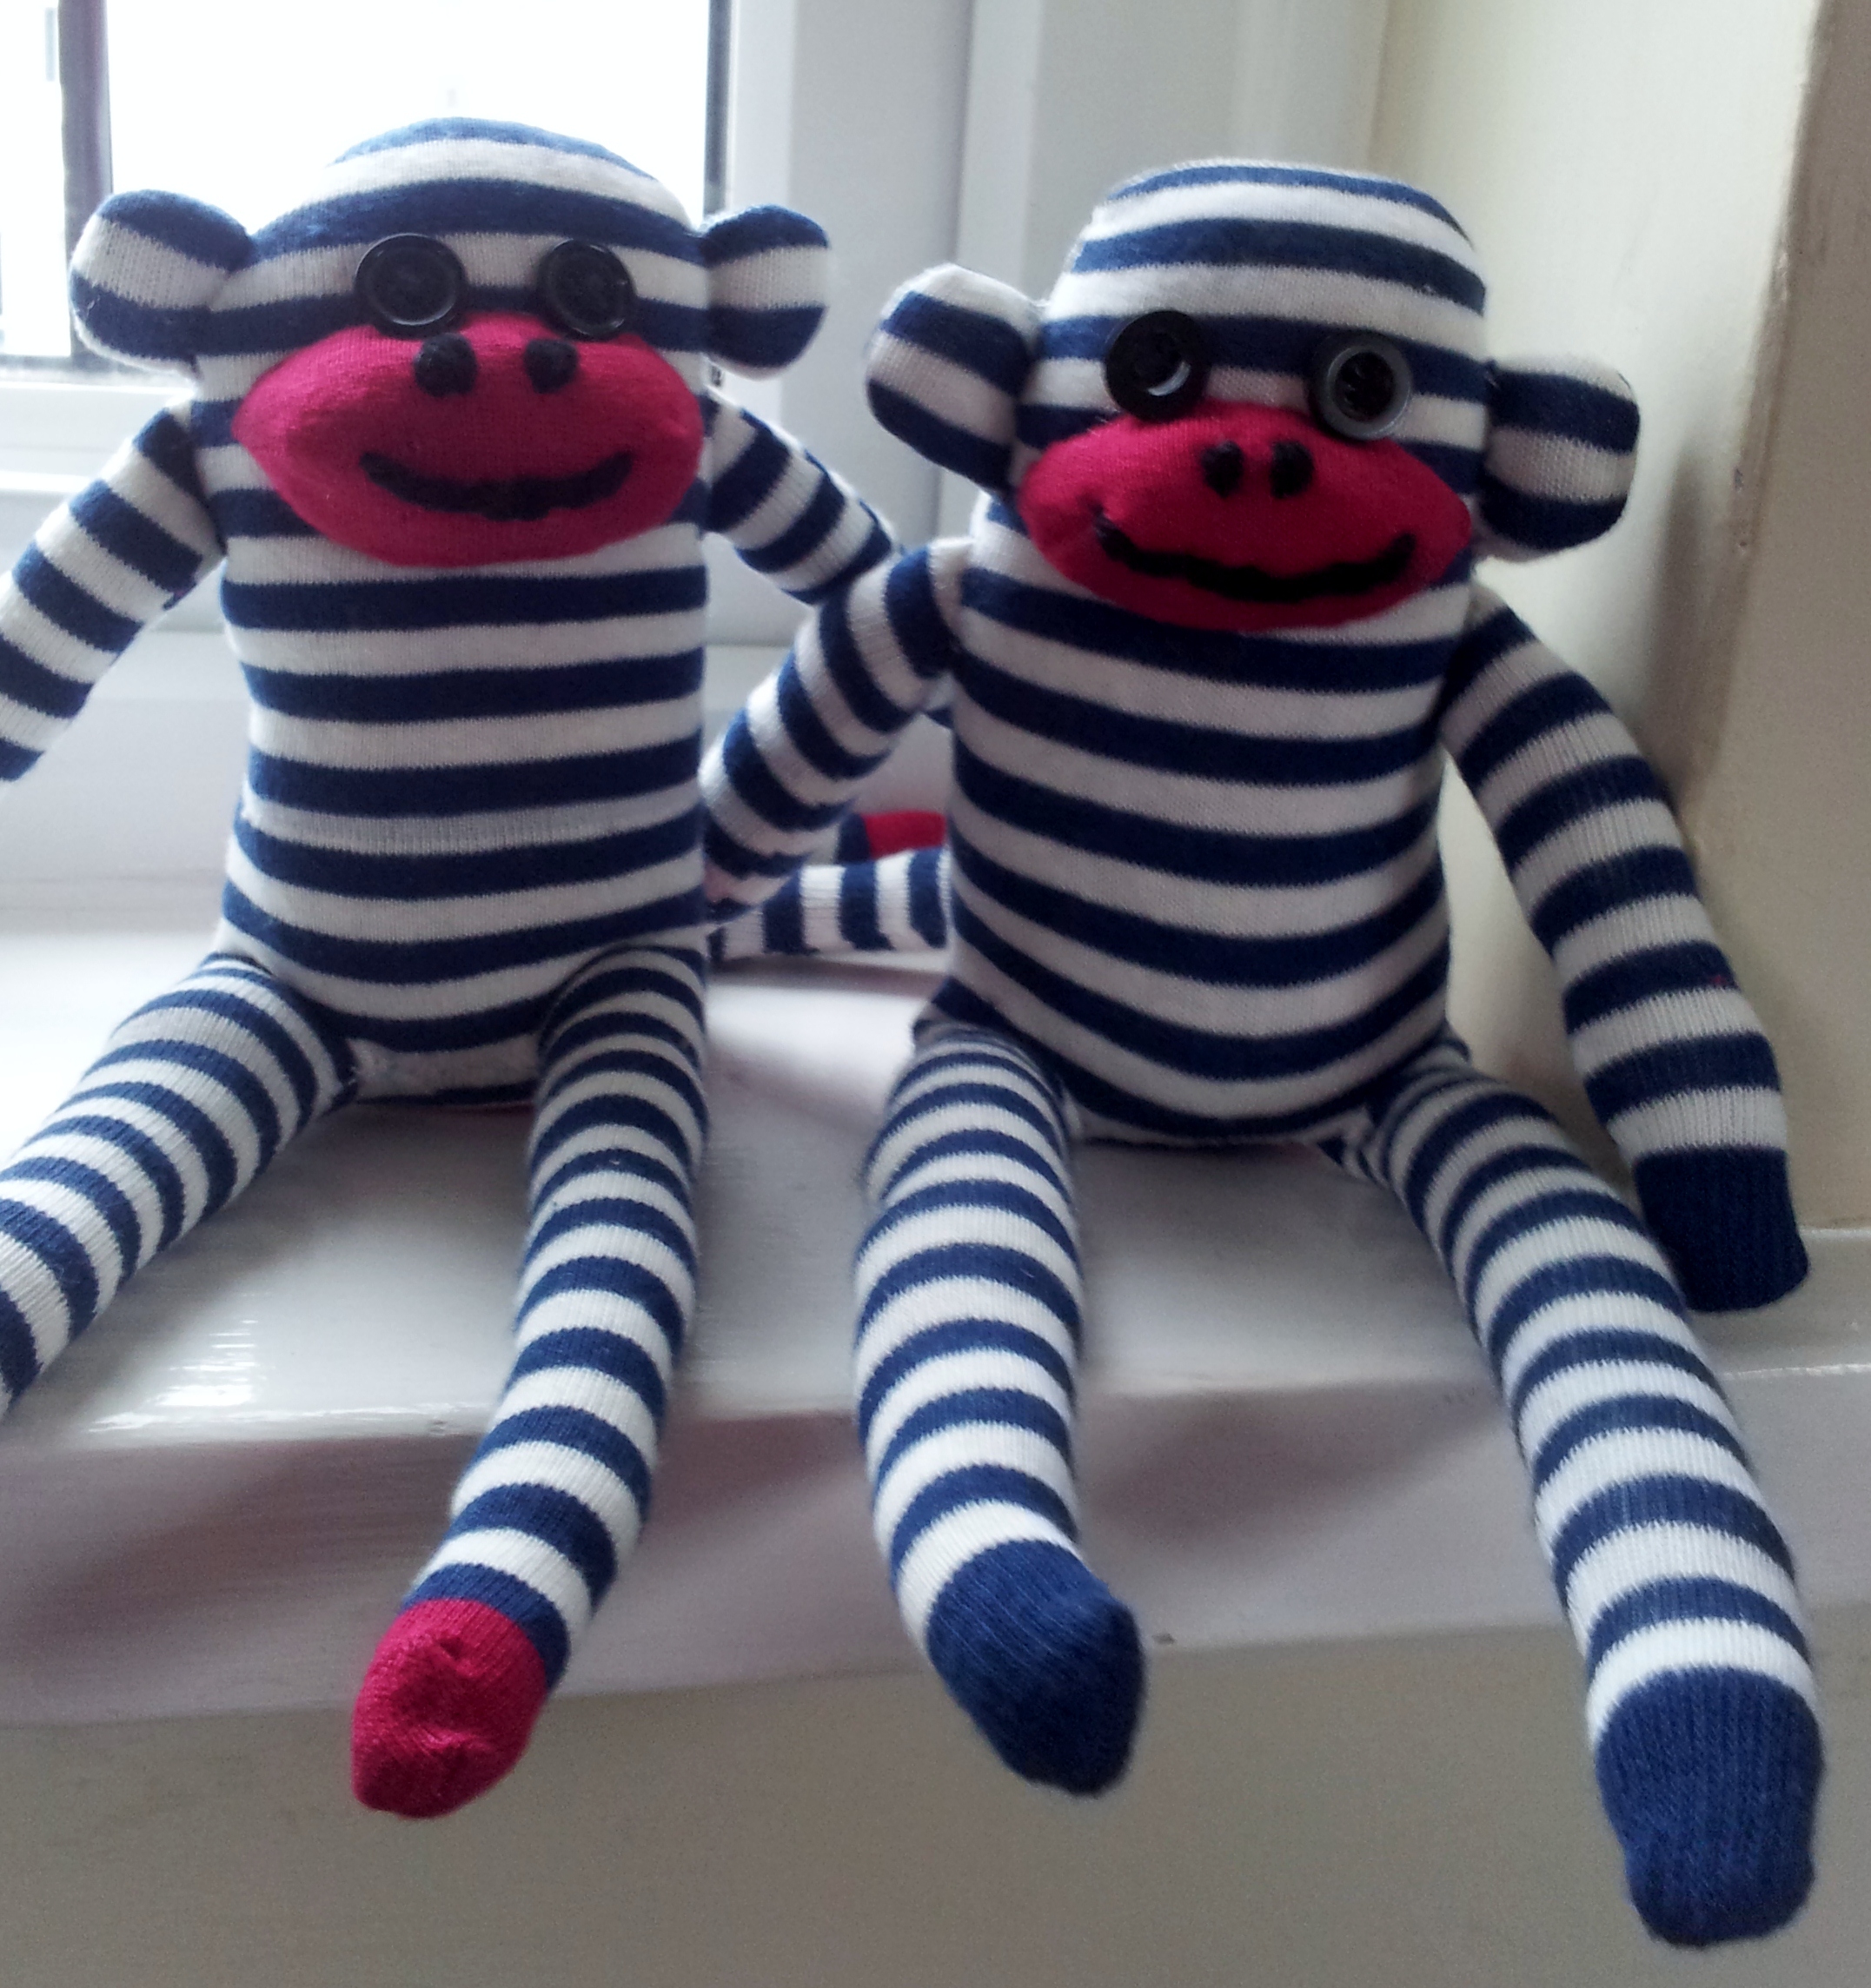 How To Make A Sock Monkey Without Sewing